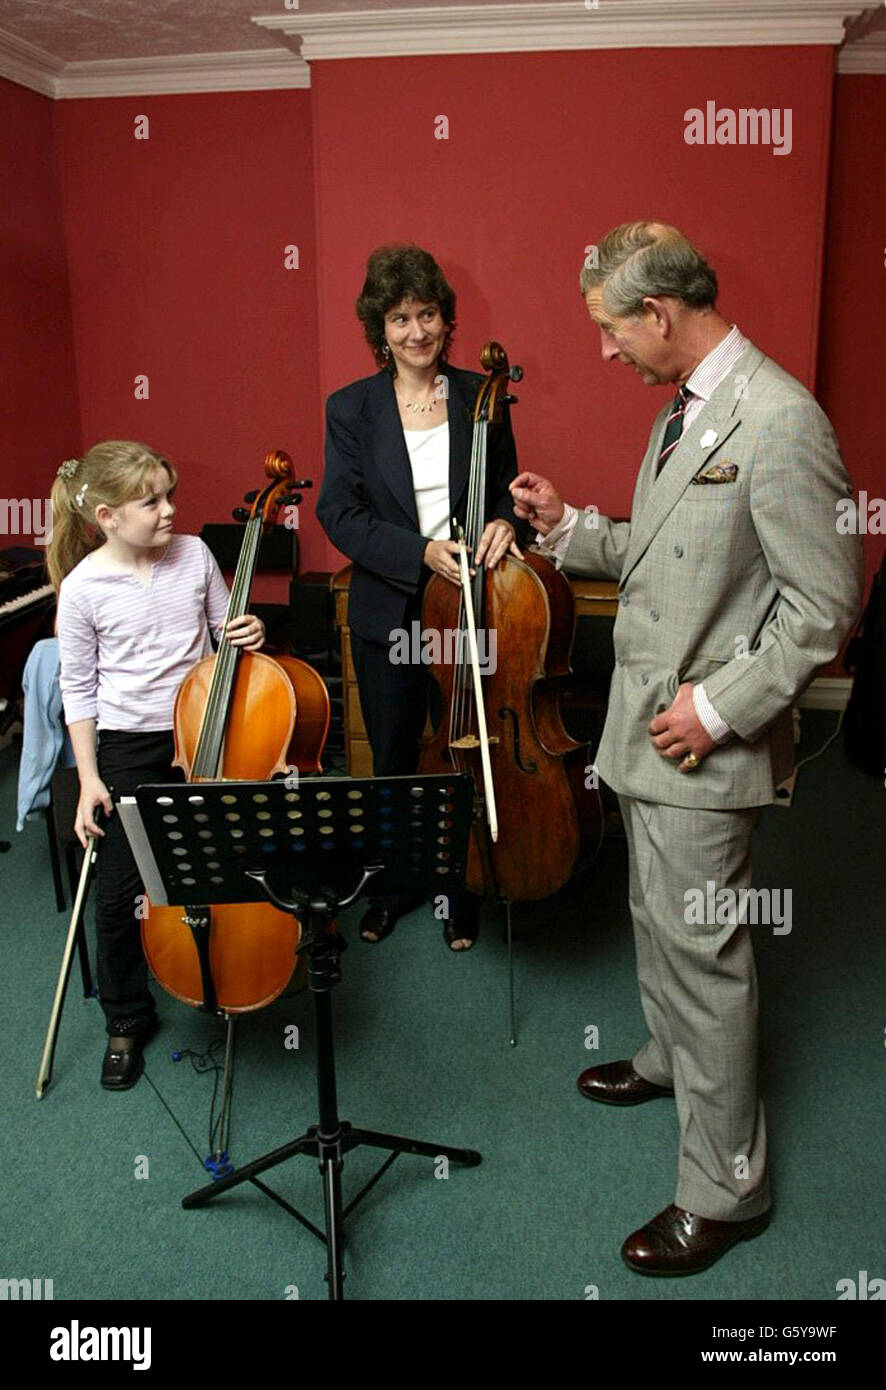 The Prince of Wales visits staff and pupils at the William Mathies Music Centre in Caernarfon where he was watching them perform at a concert in St Mary's Church. It was his third engagement of the day having visited Plas Mawr, a restored Elizabethan town house in the historic north Wales town of Conwy, where he was meeting local business leaders and the Euro DPC factory, in Llanberis, which produces healthcare diagnostic products and won the Queen's Award for Export Achievement four years ago. The visit was the Prince's last leg of his traditional three-day summer tour of the Principality. Stock Photo